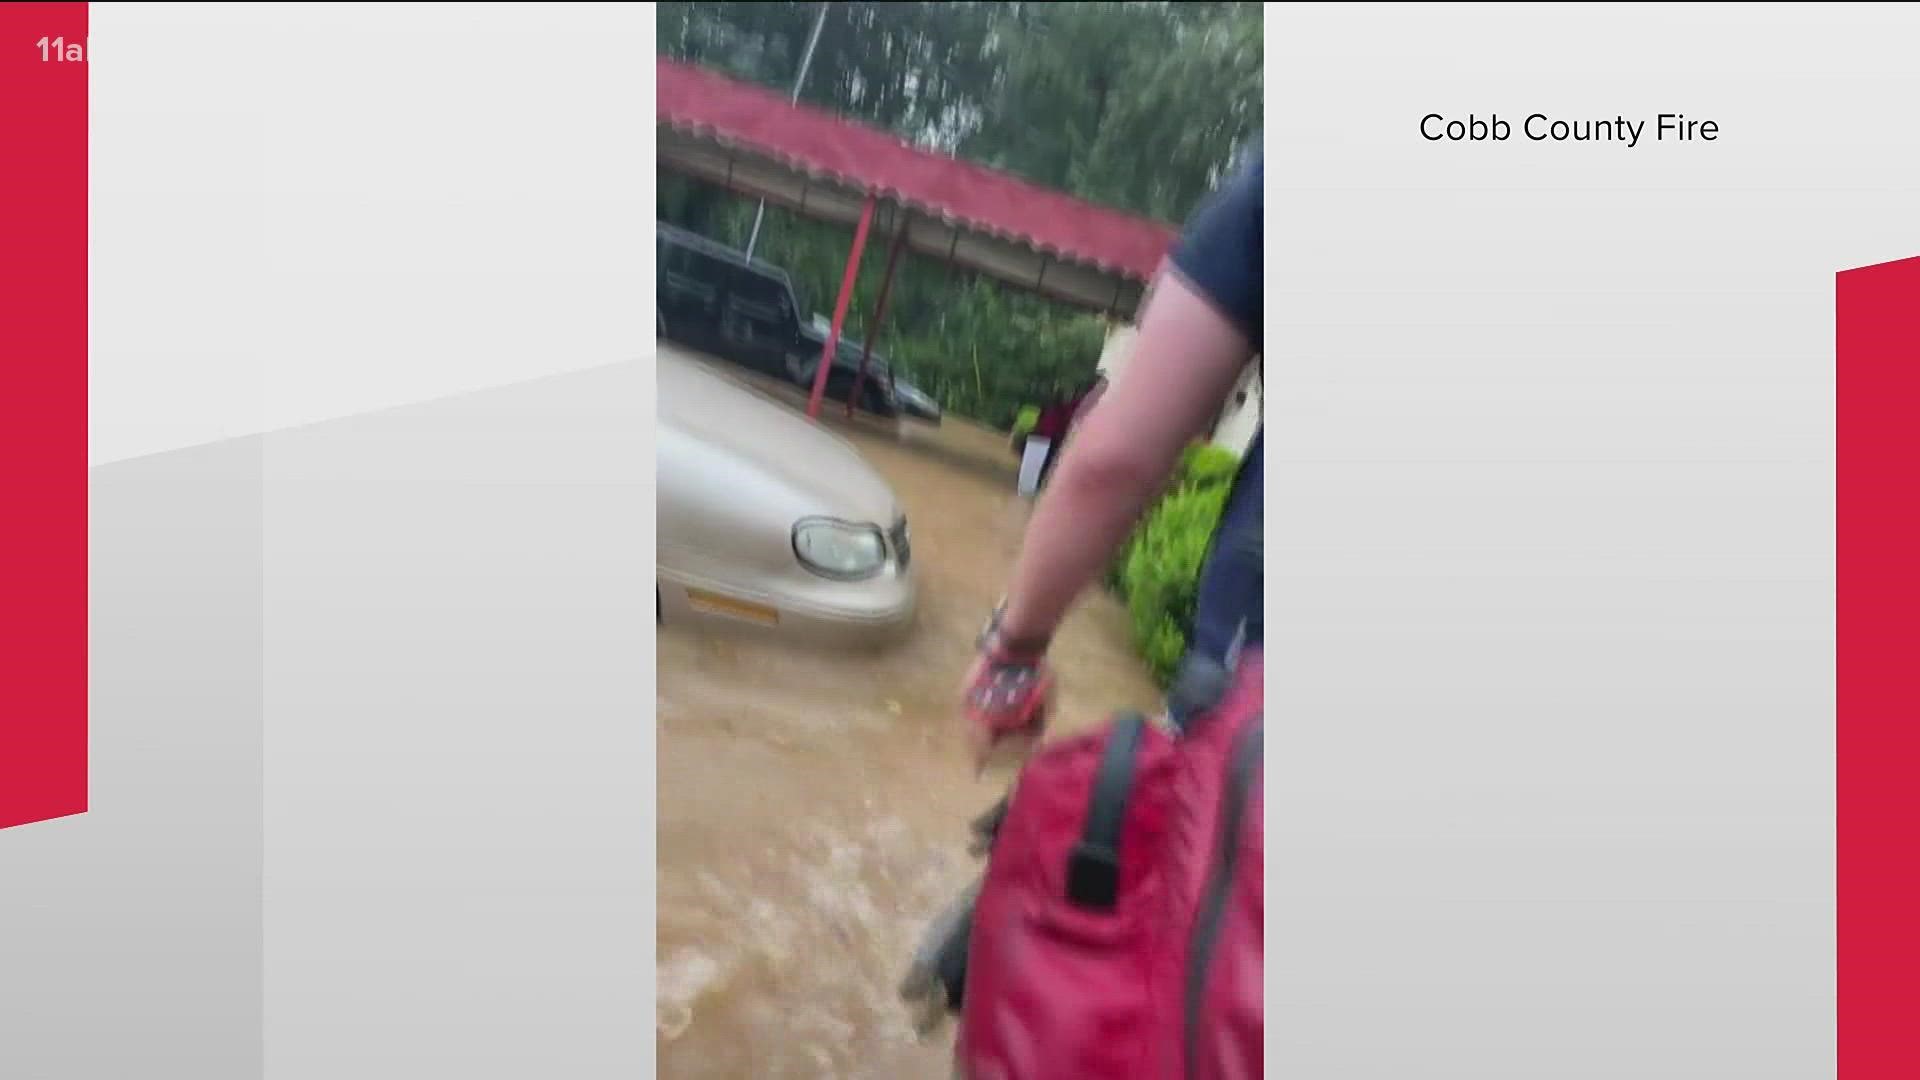 A flooded daycare leading to a rescue operation. Firefighters are working to safely evacuate 27 children and 4 adults.